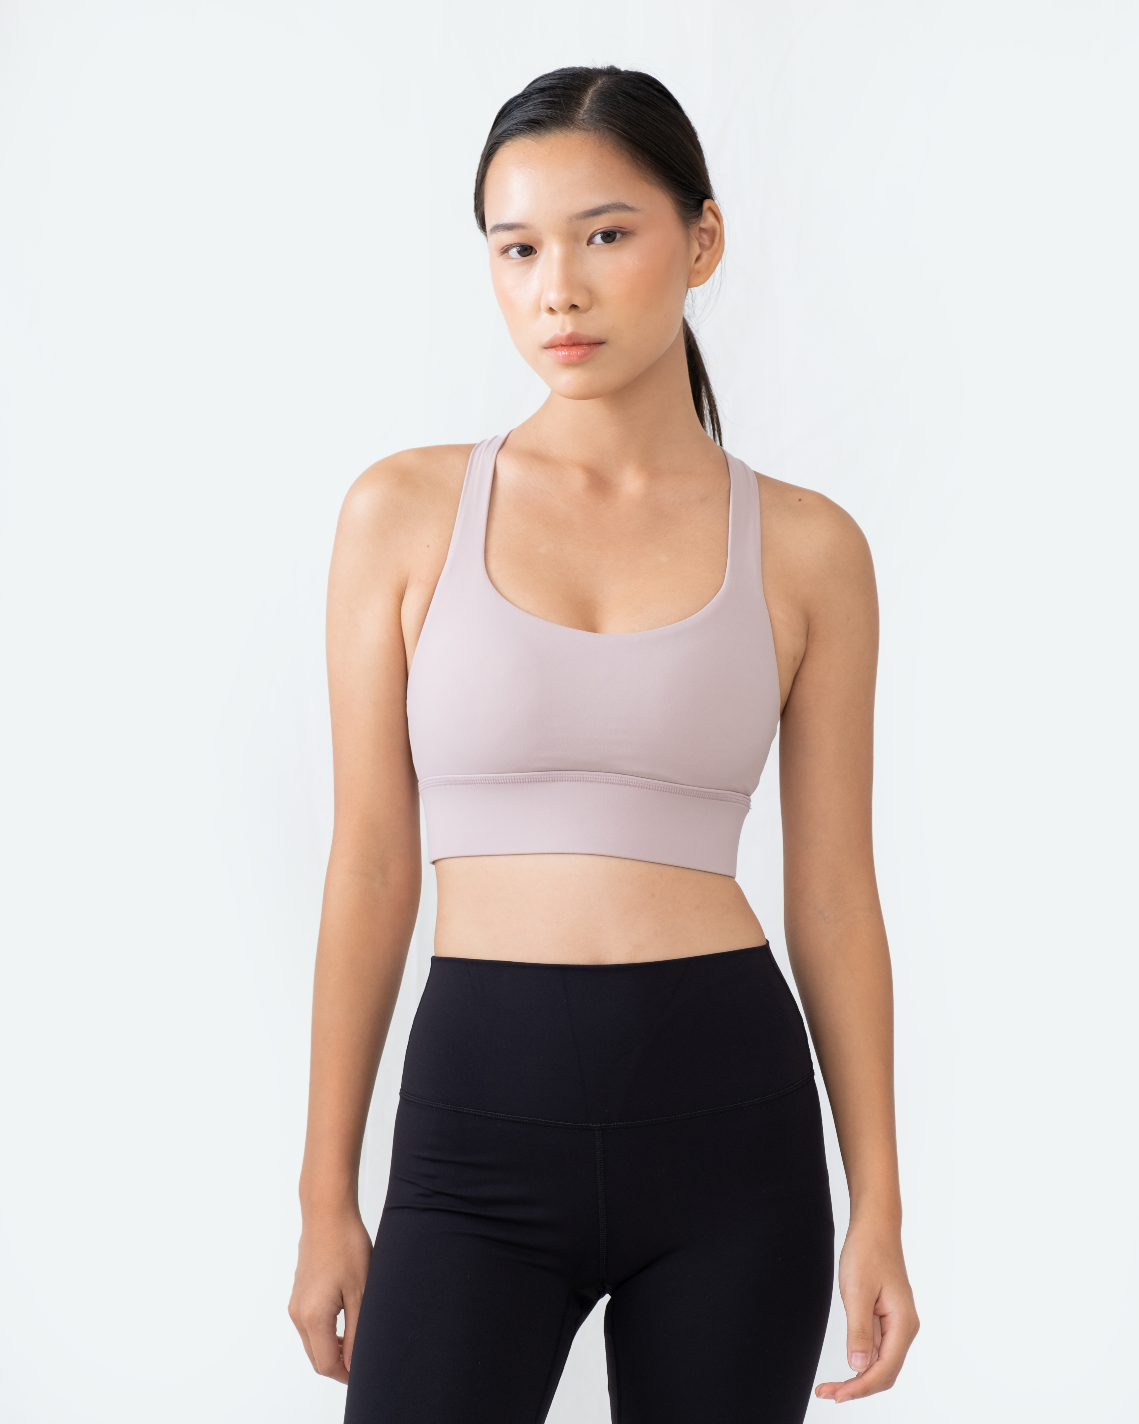 Alleviate Bra Medium Support with A/B cup